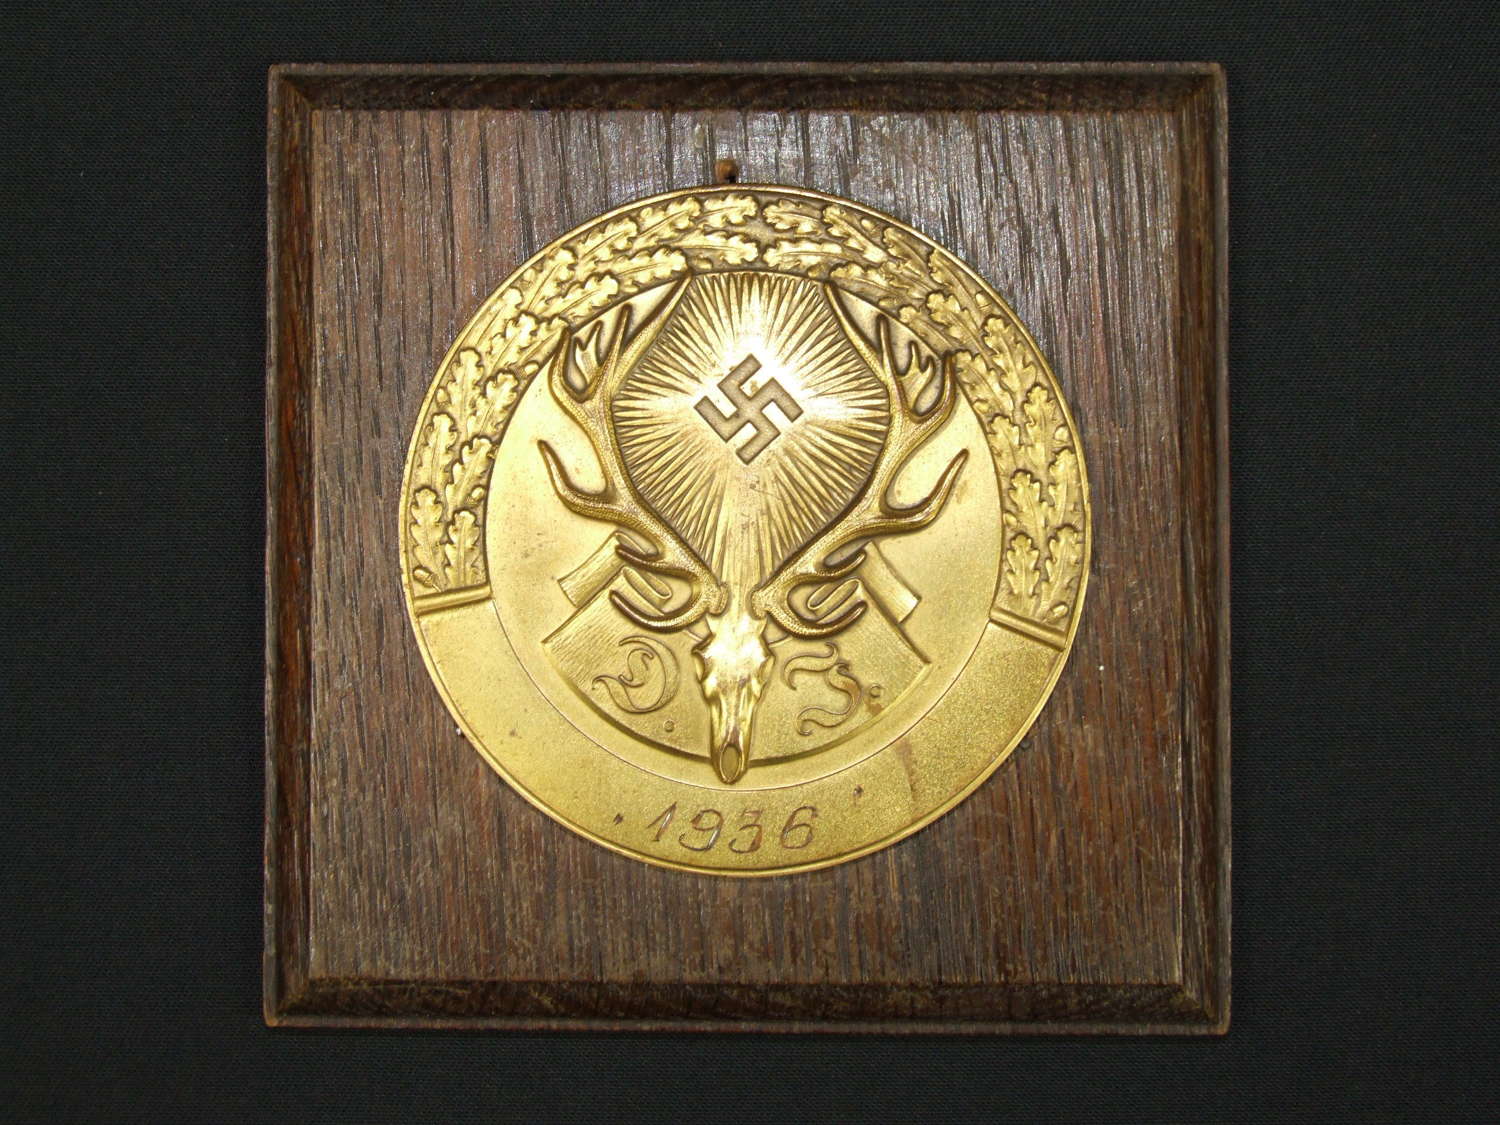 1936 Hunting Association Award in Gold on Wall Mount